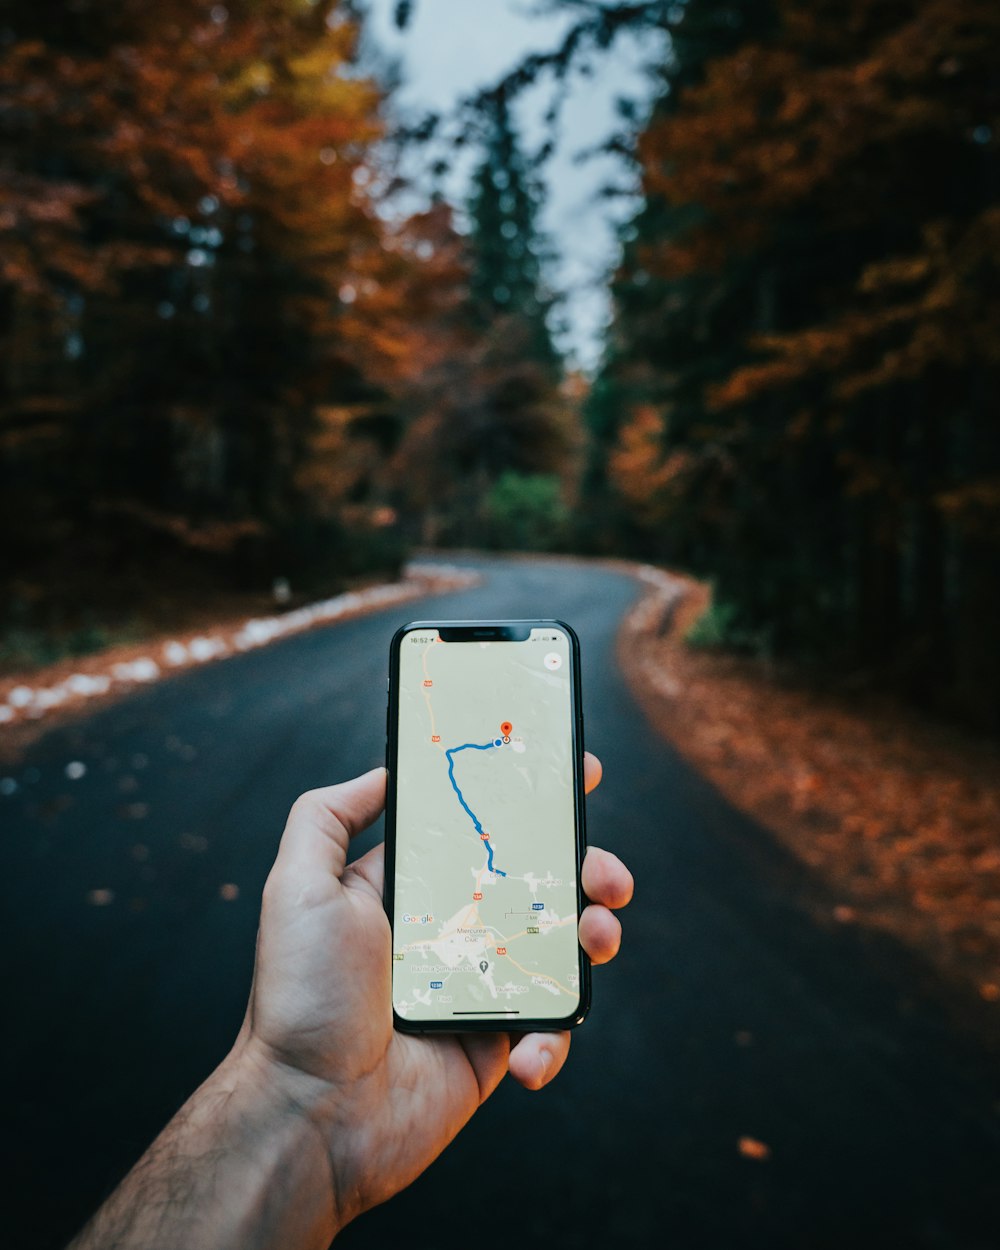 20+ Map Pictures | Download Free Images & Stock Photos on Unsplash